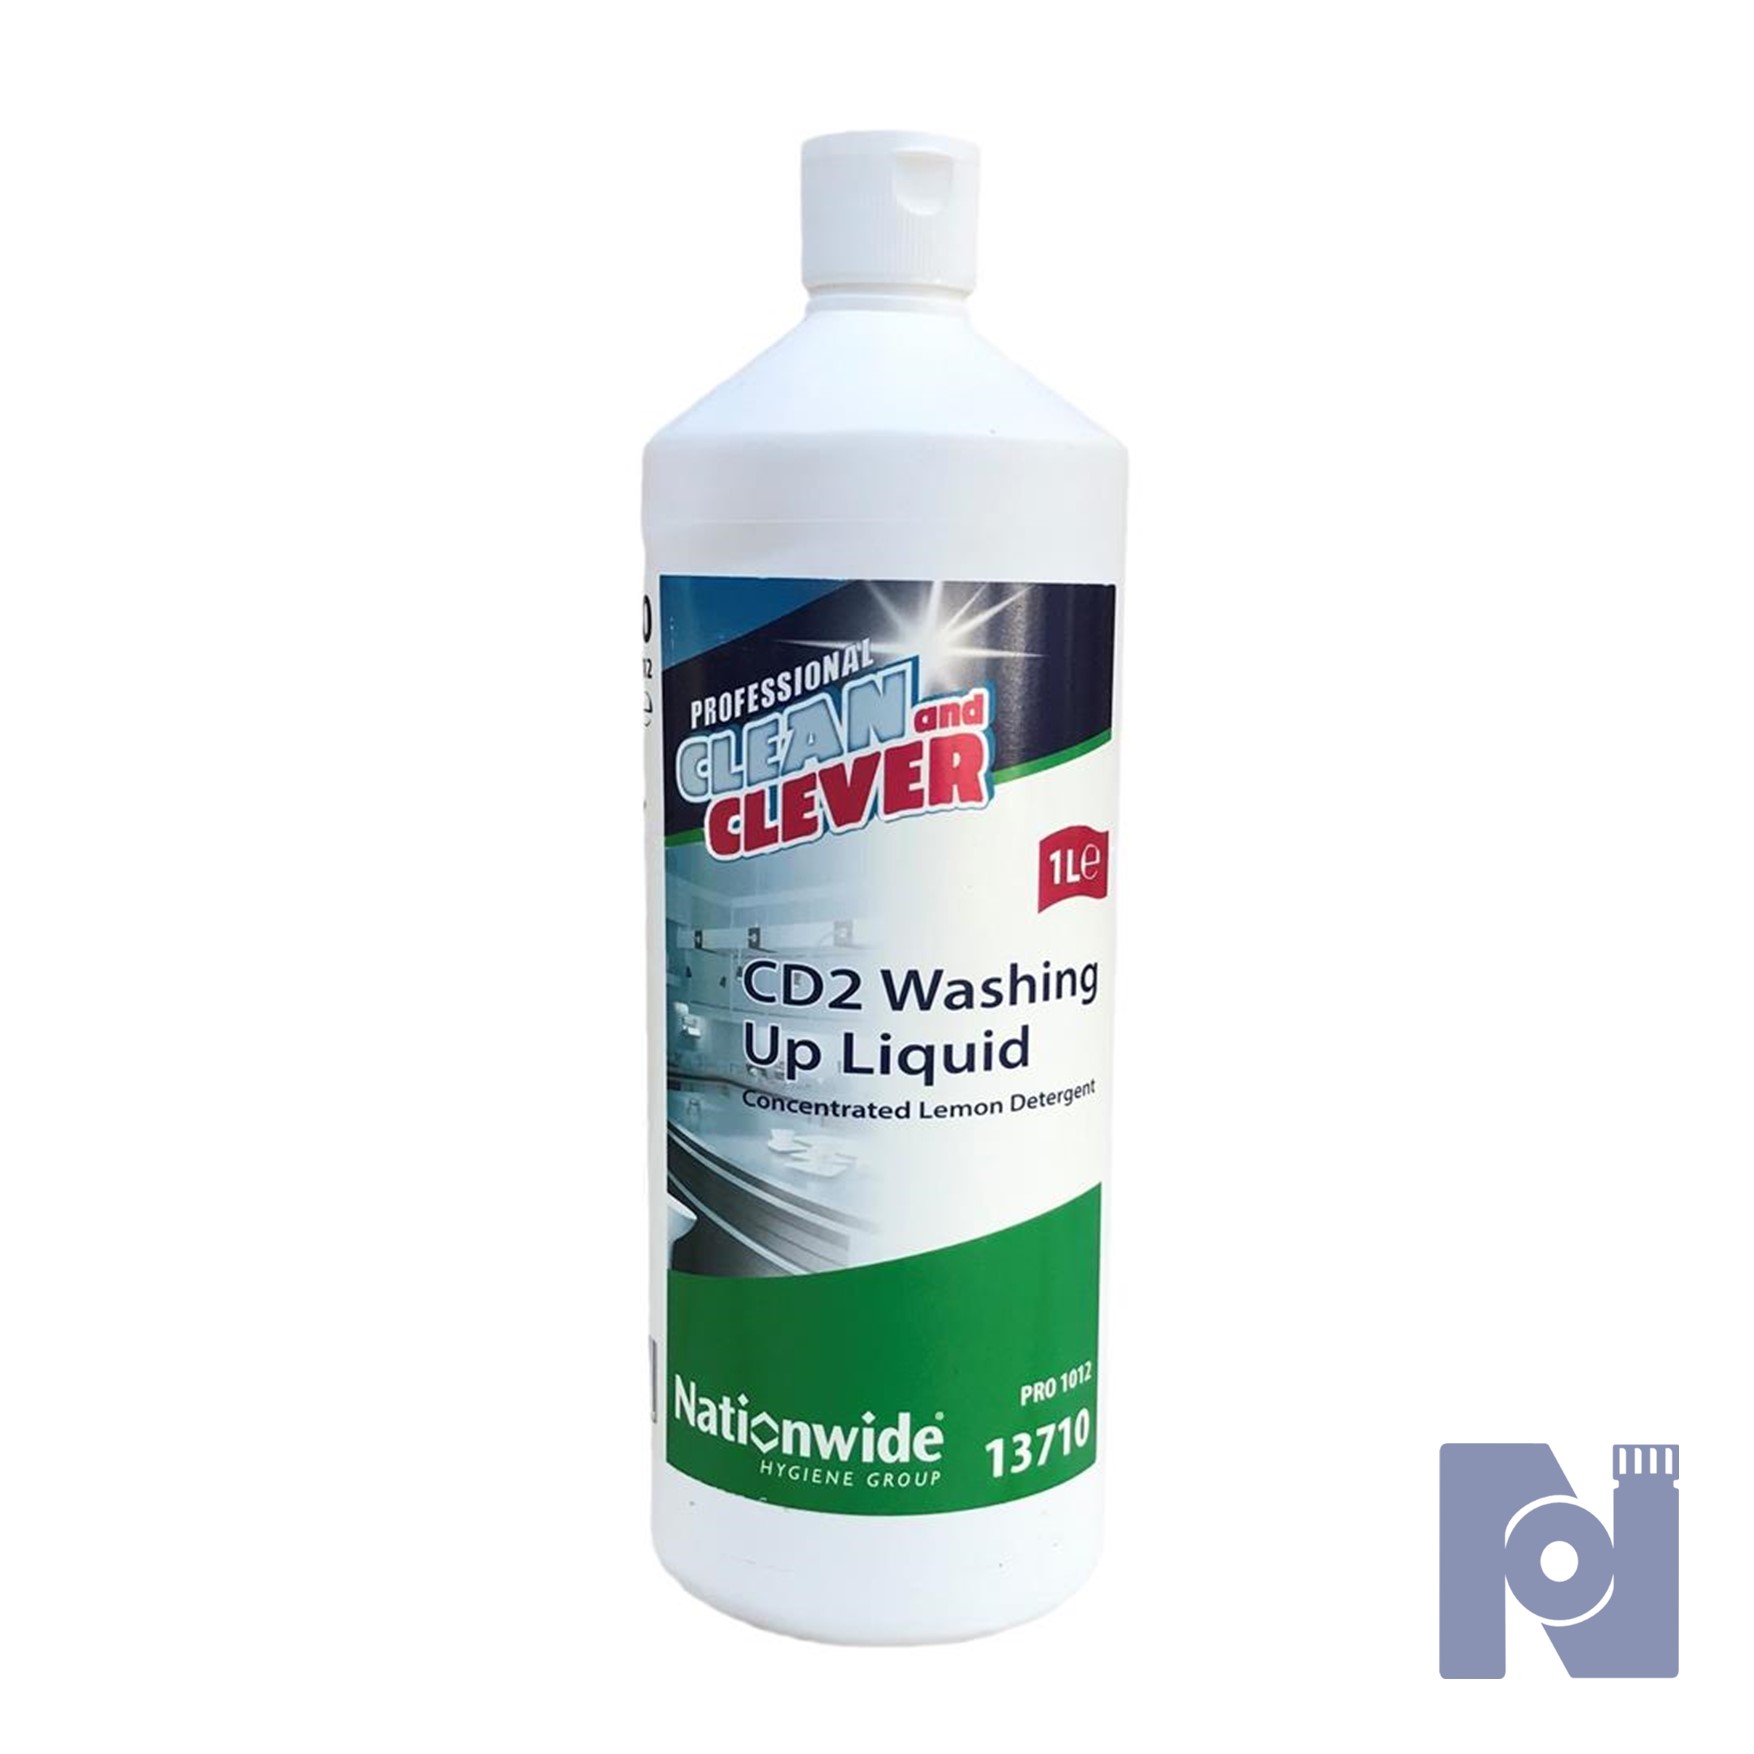 Clean & Clever CD2 Washing Up Liquid